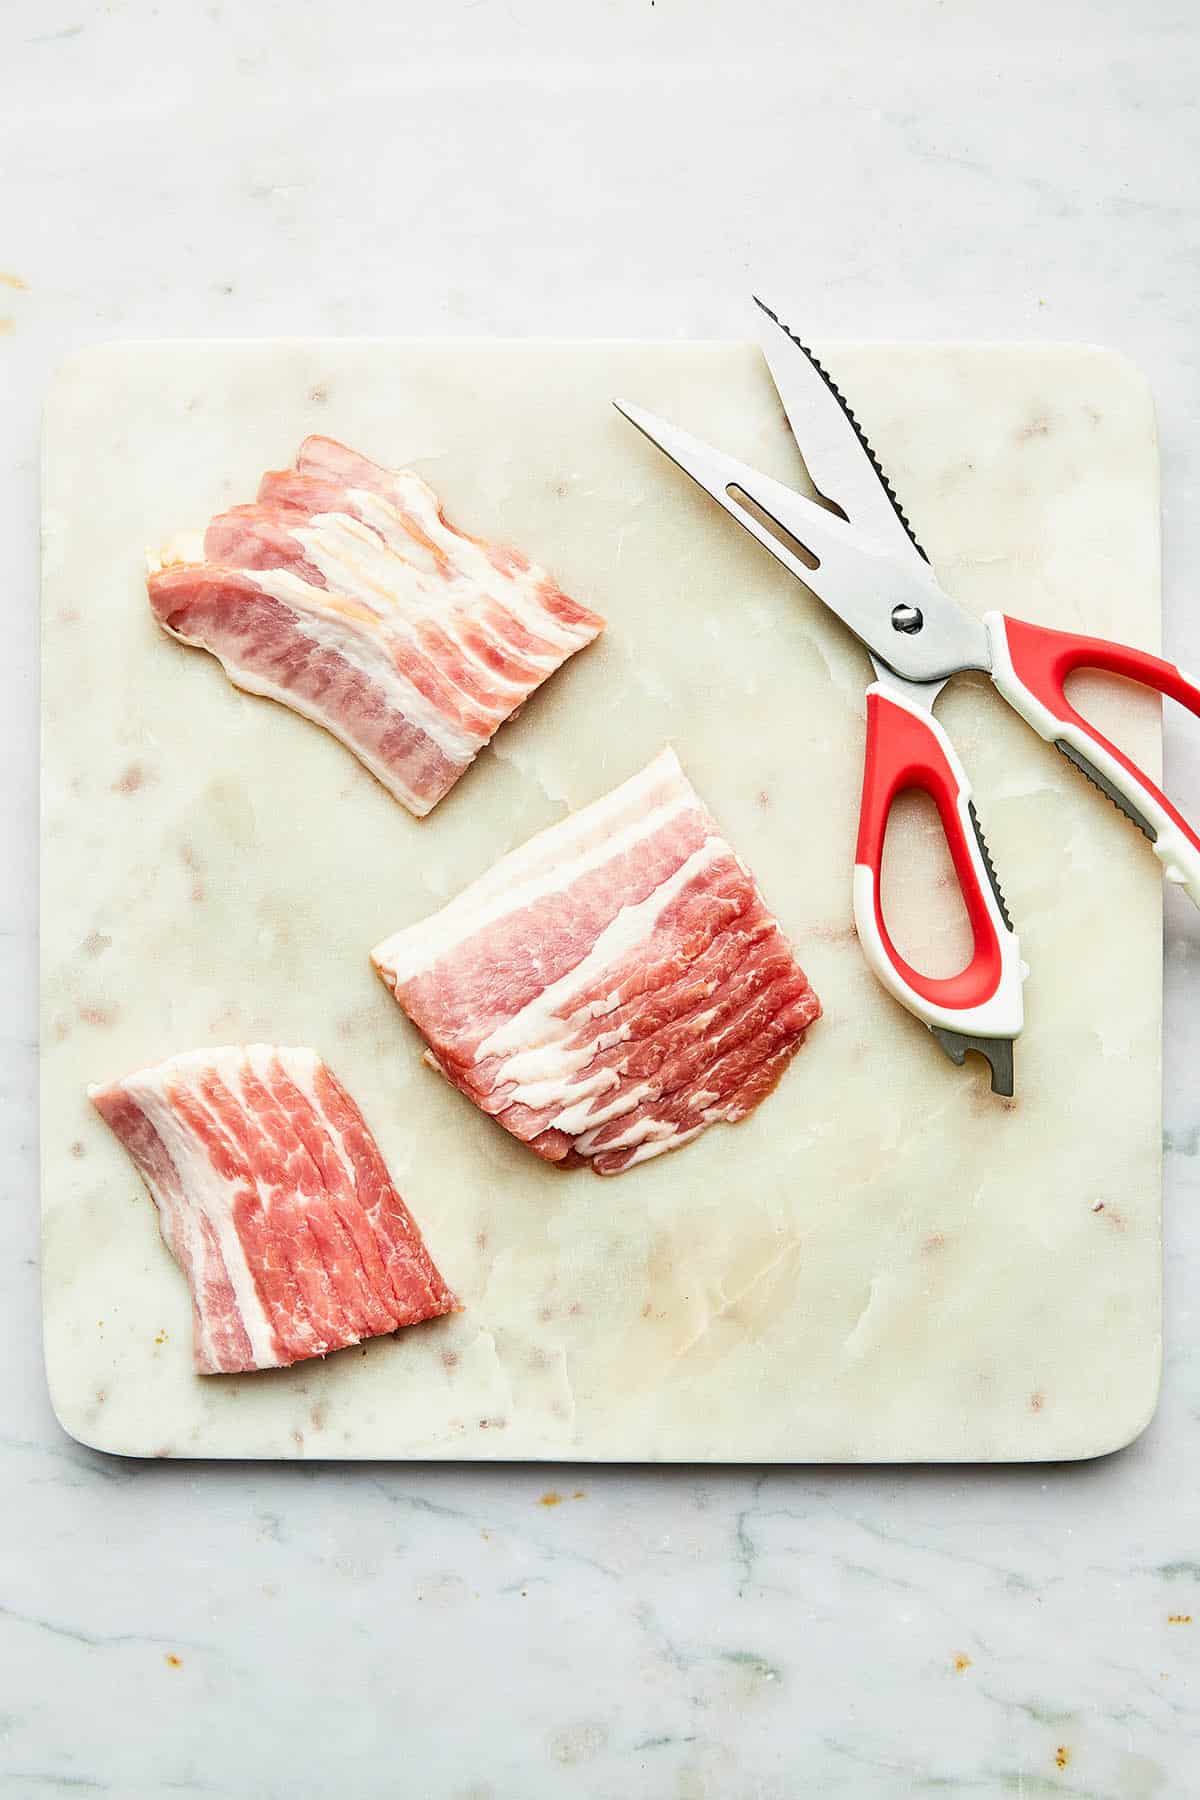 Bacon strips cut into thirds on a marble cutting board with a pair of kitchen shears nearby.